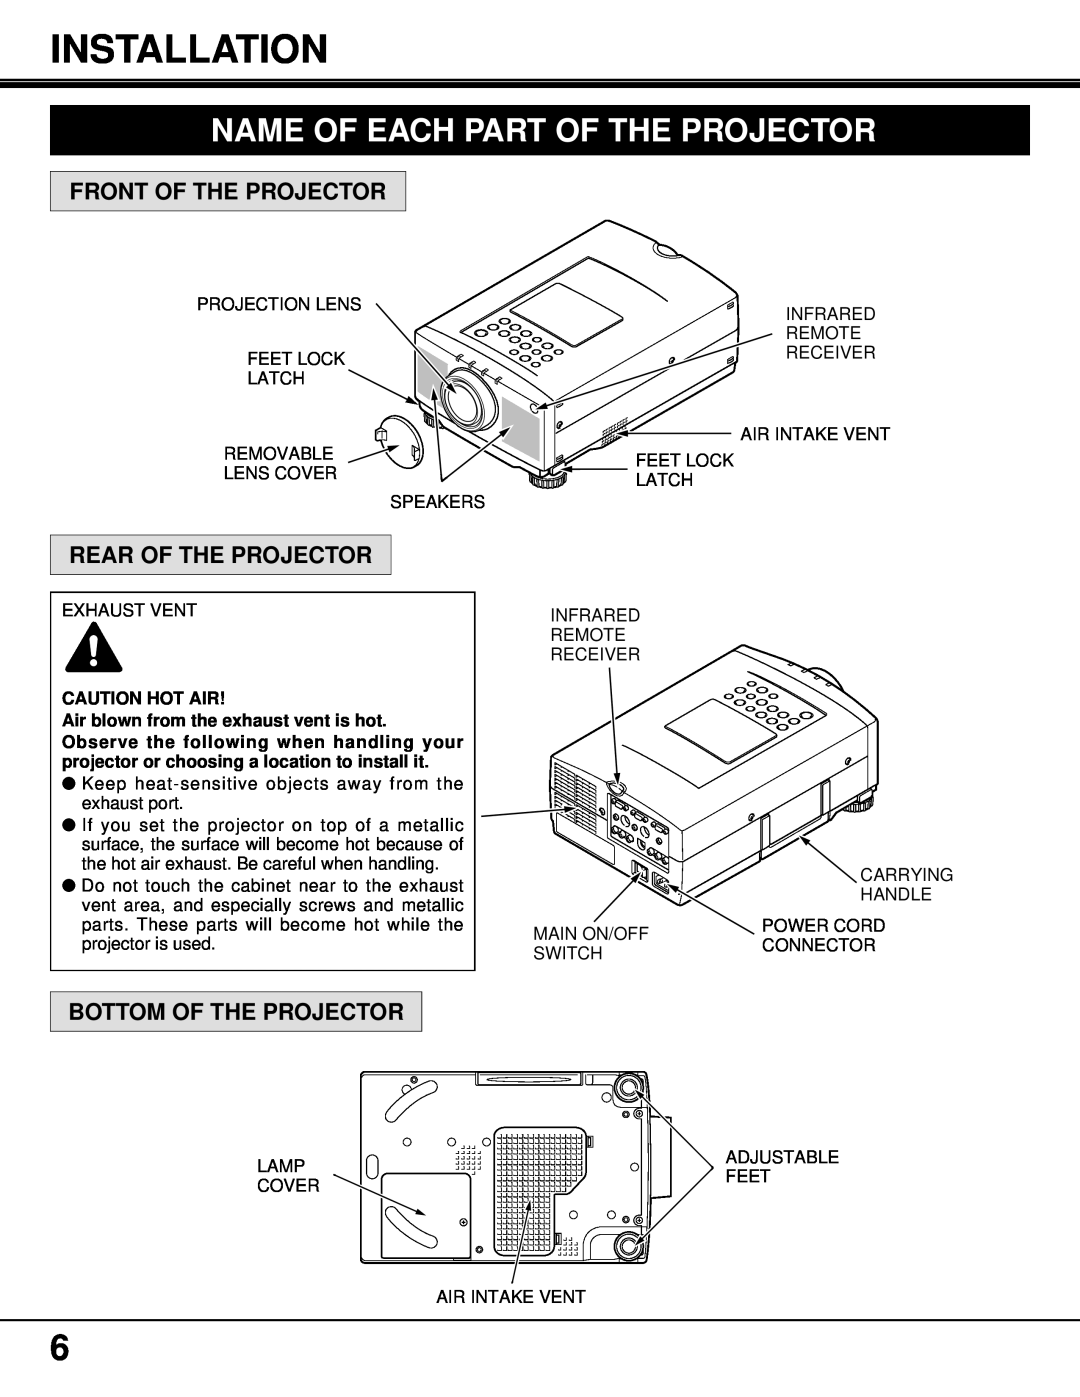 BOXLIGHT MP-37t manual Installation, Name Of Each Part Of The Projector, Front Of The Projector, Rear Of The Projector 